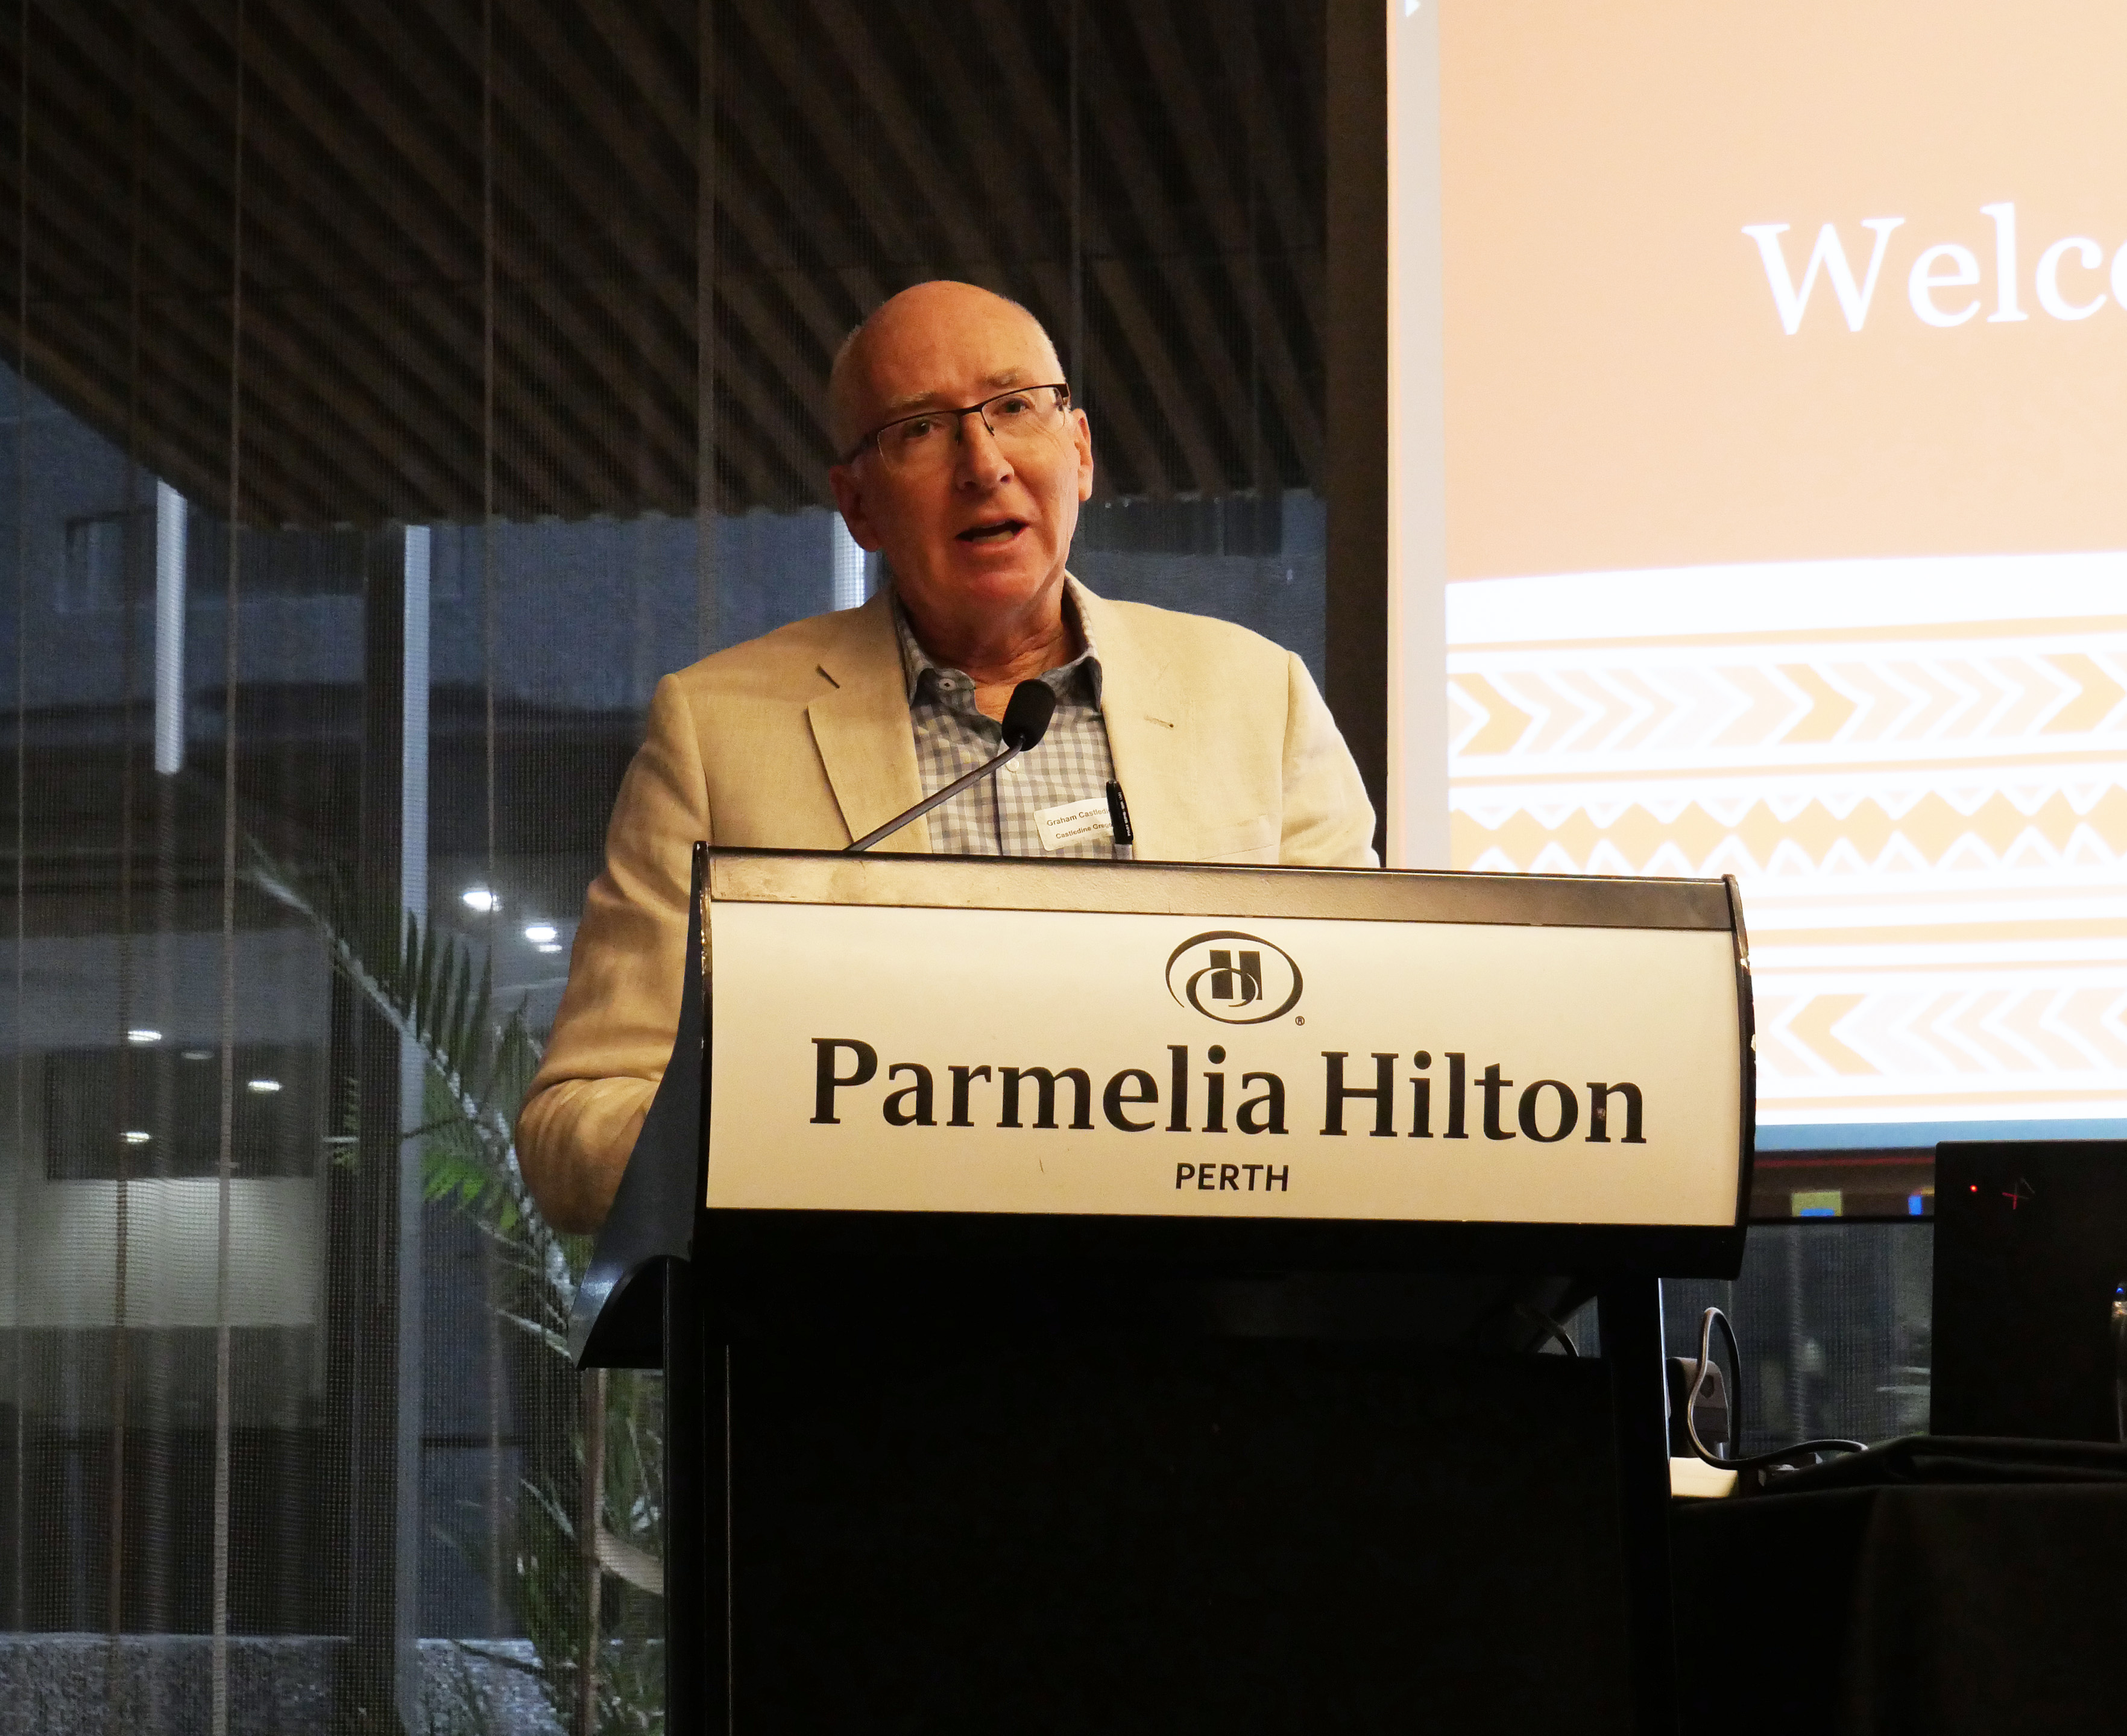 Image of Graham Castledine speaking at the Perth information session on Phase 2 of the Biodiscovery Bill